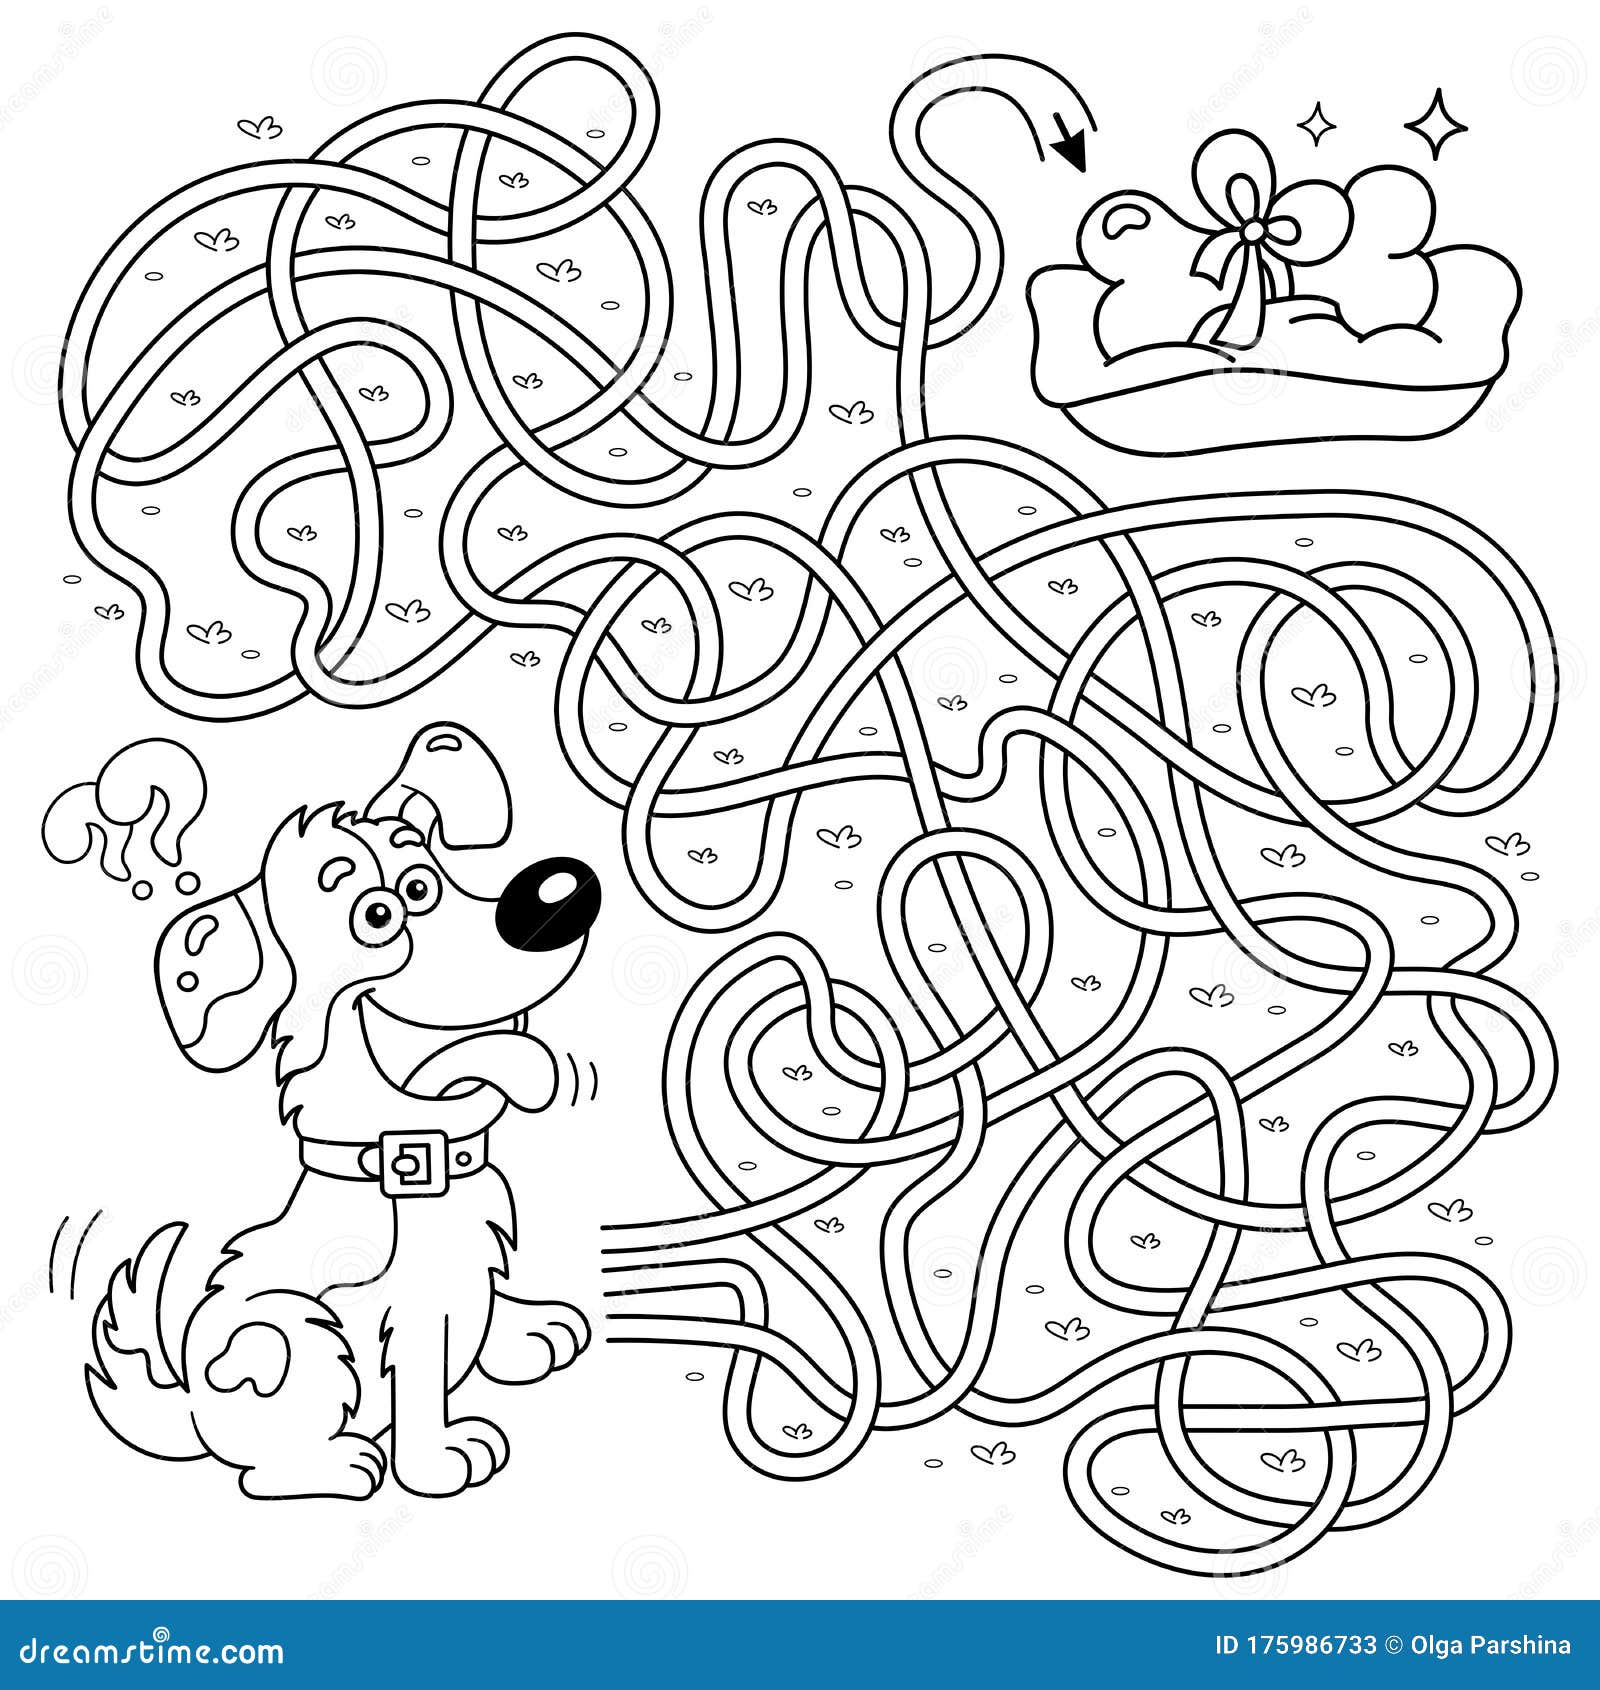 https://thumbs.dreamstime.com/z/maze-labyrinth-game-preschool-children-puzzle-tangled-road-matching-coloring-page-outline-cartoon-dog-bone-book-175986733.jpg